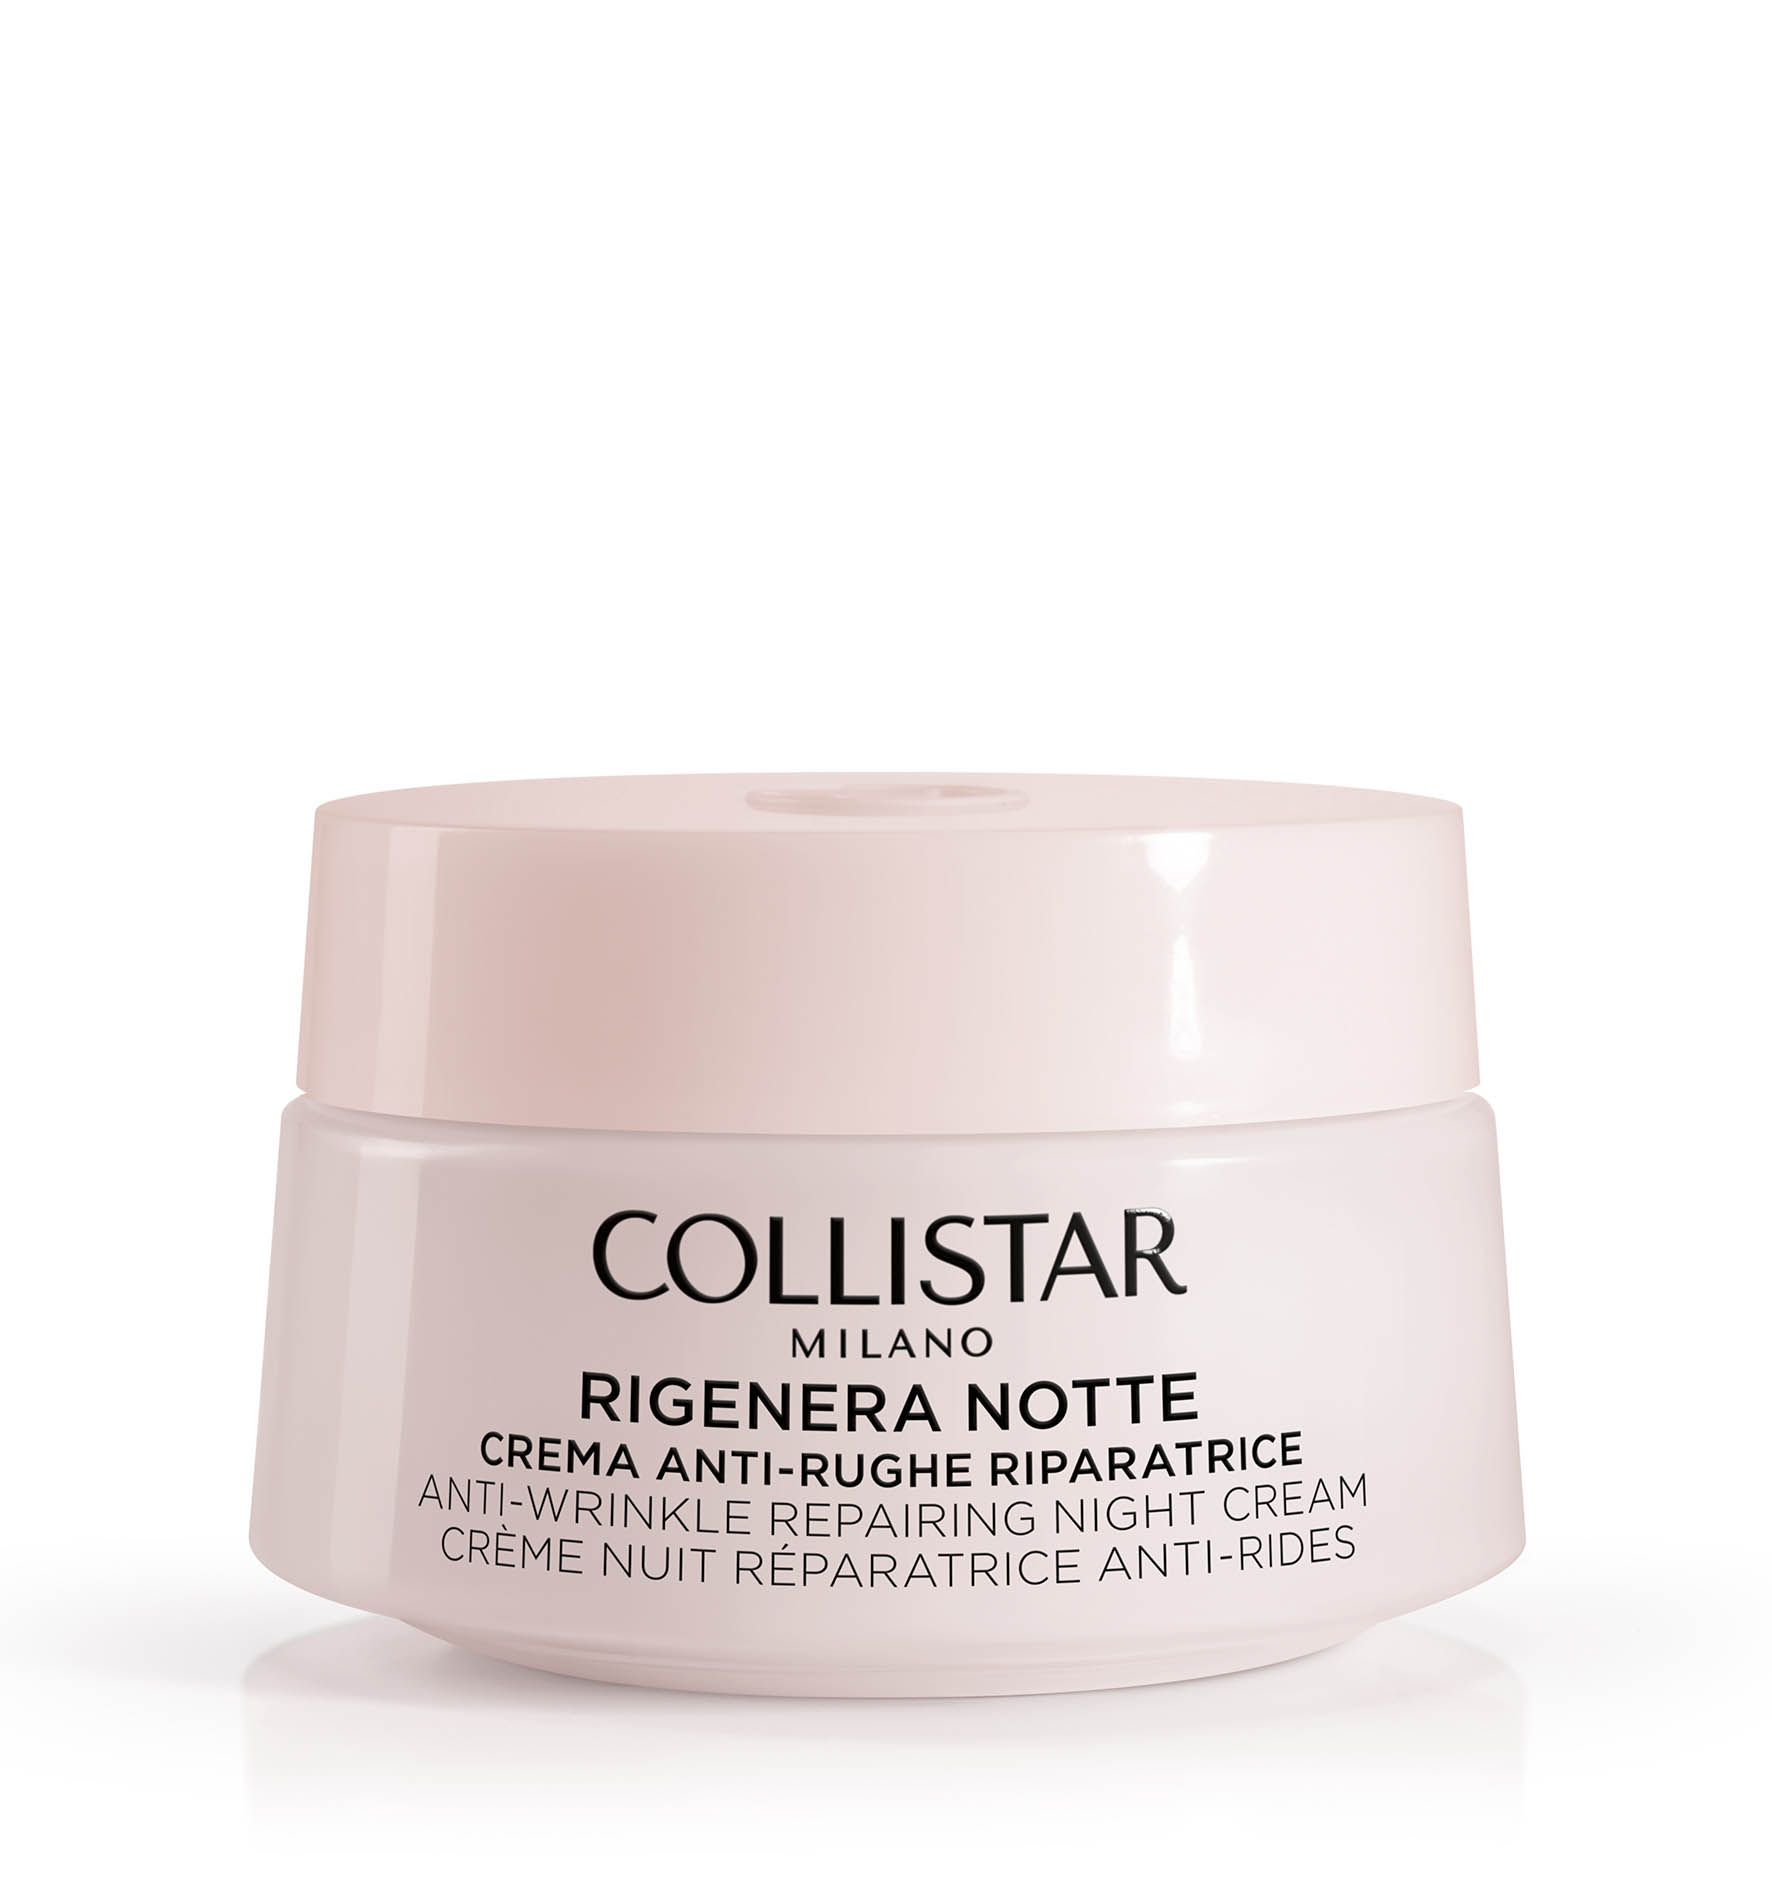 RIGENERA ANTI-WRINKLE REPAIRING FACE AND NECK NIGHT CREAM - Lifting | Collistar - Shop Online Ufficiale